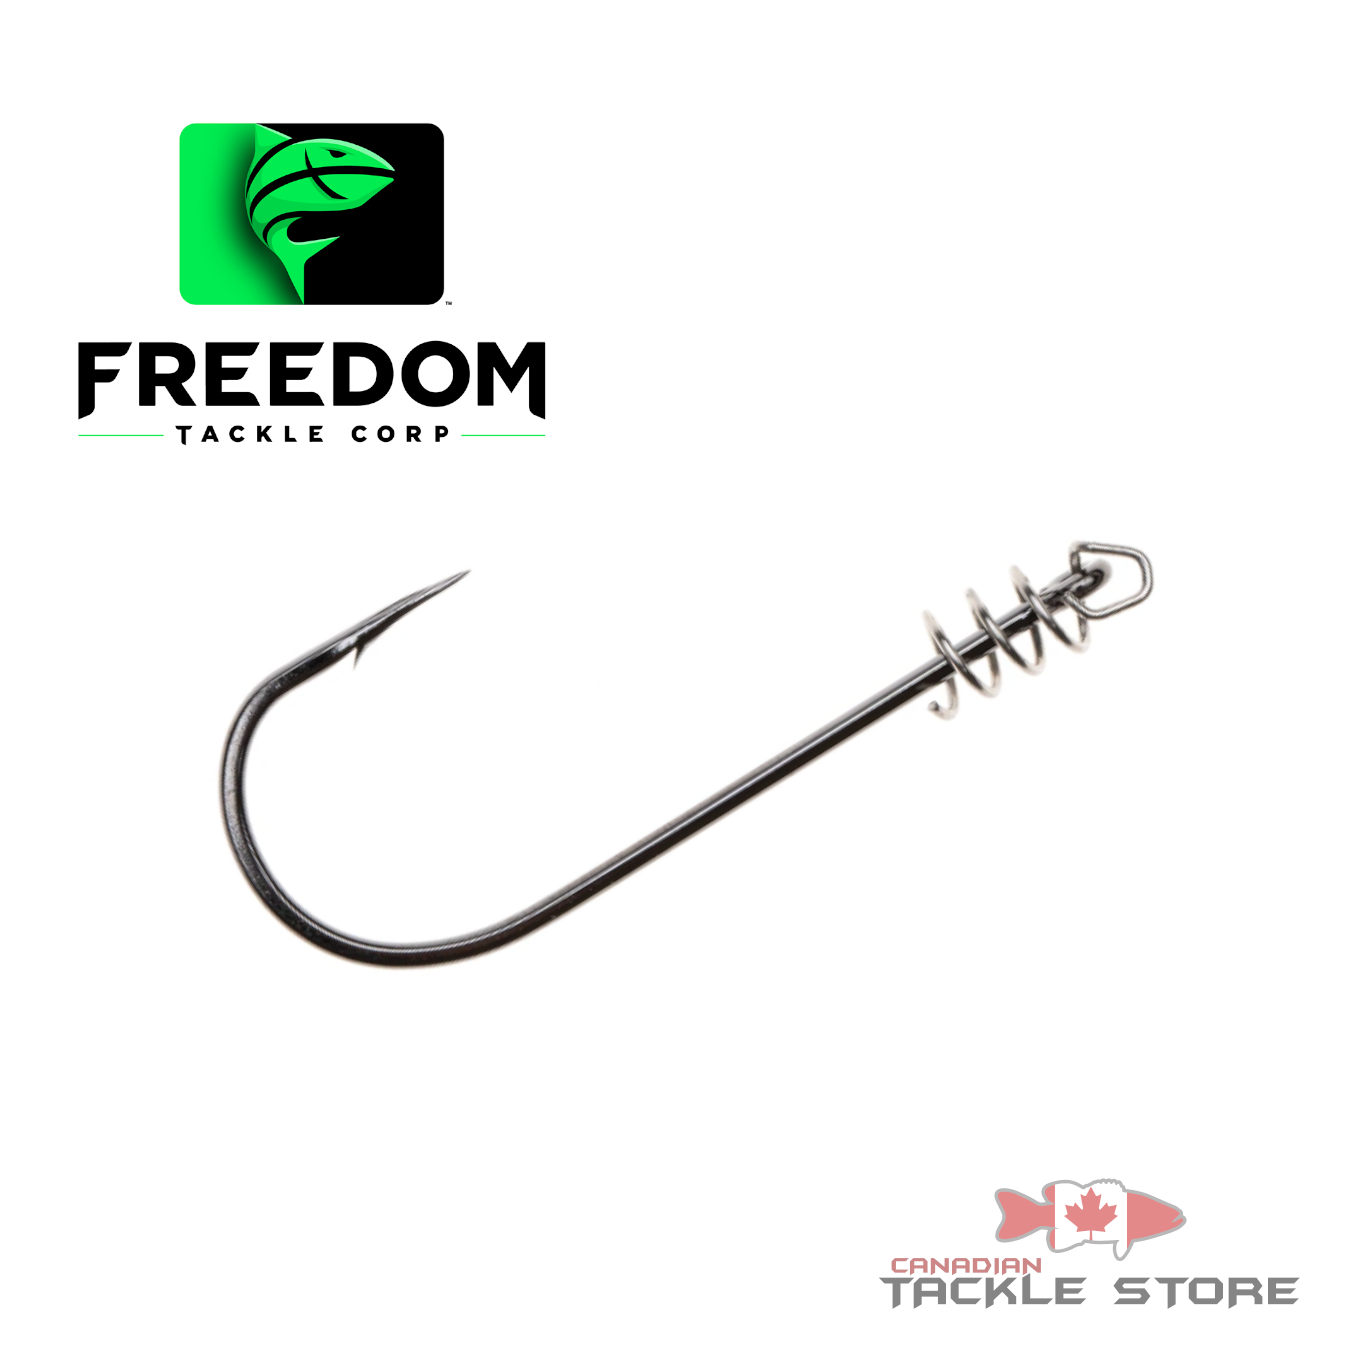 SENYUBBY 1#-8/0# Offset Octopus Hooks Rig, Fishing Wire Leader